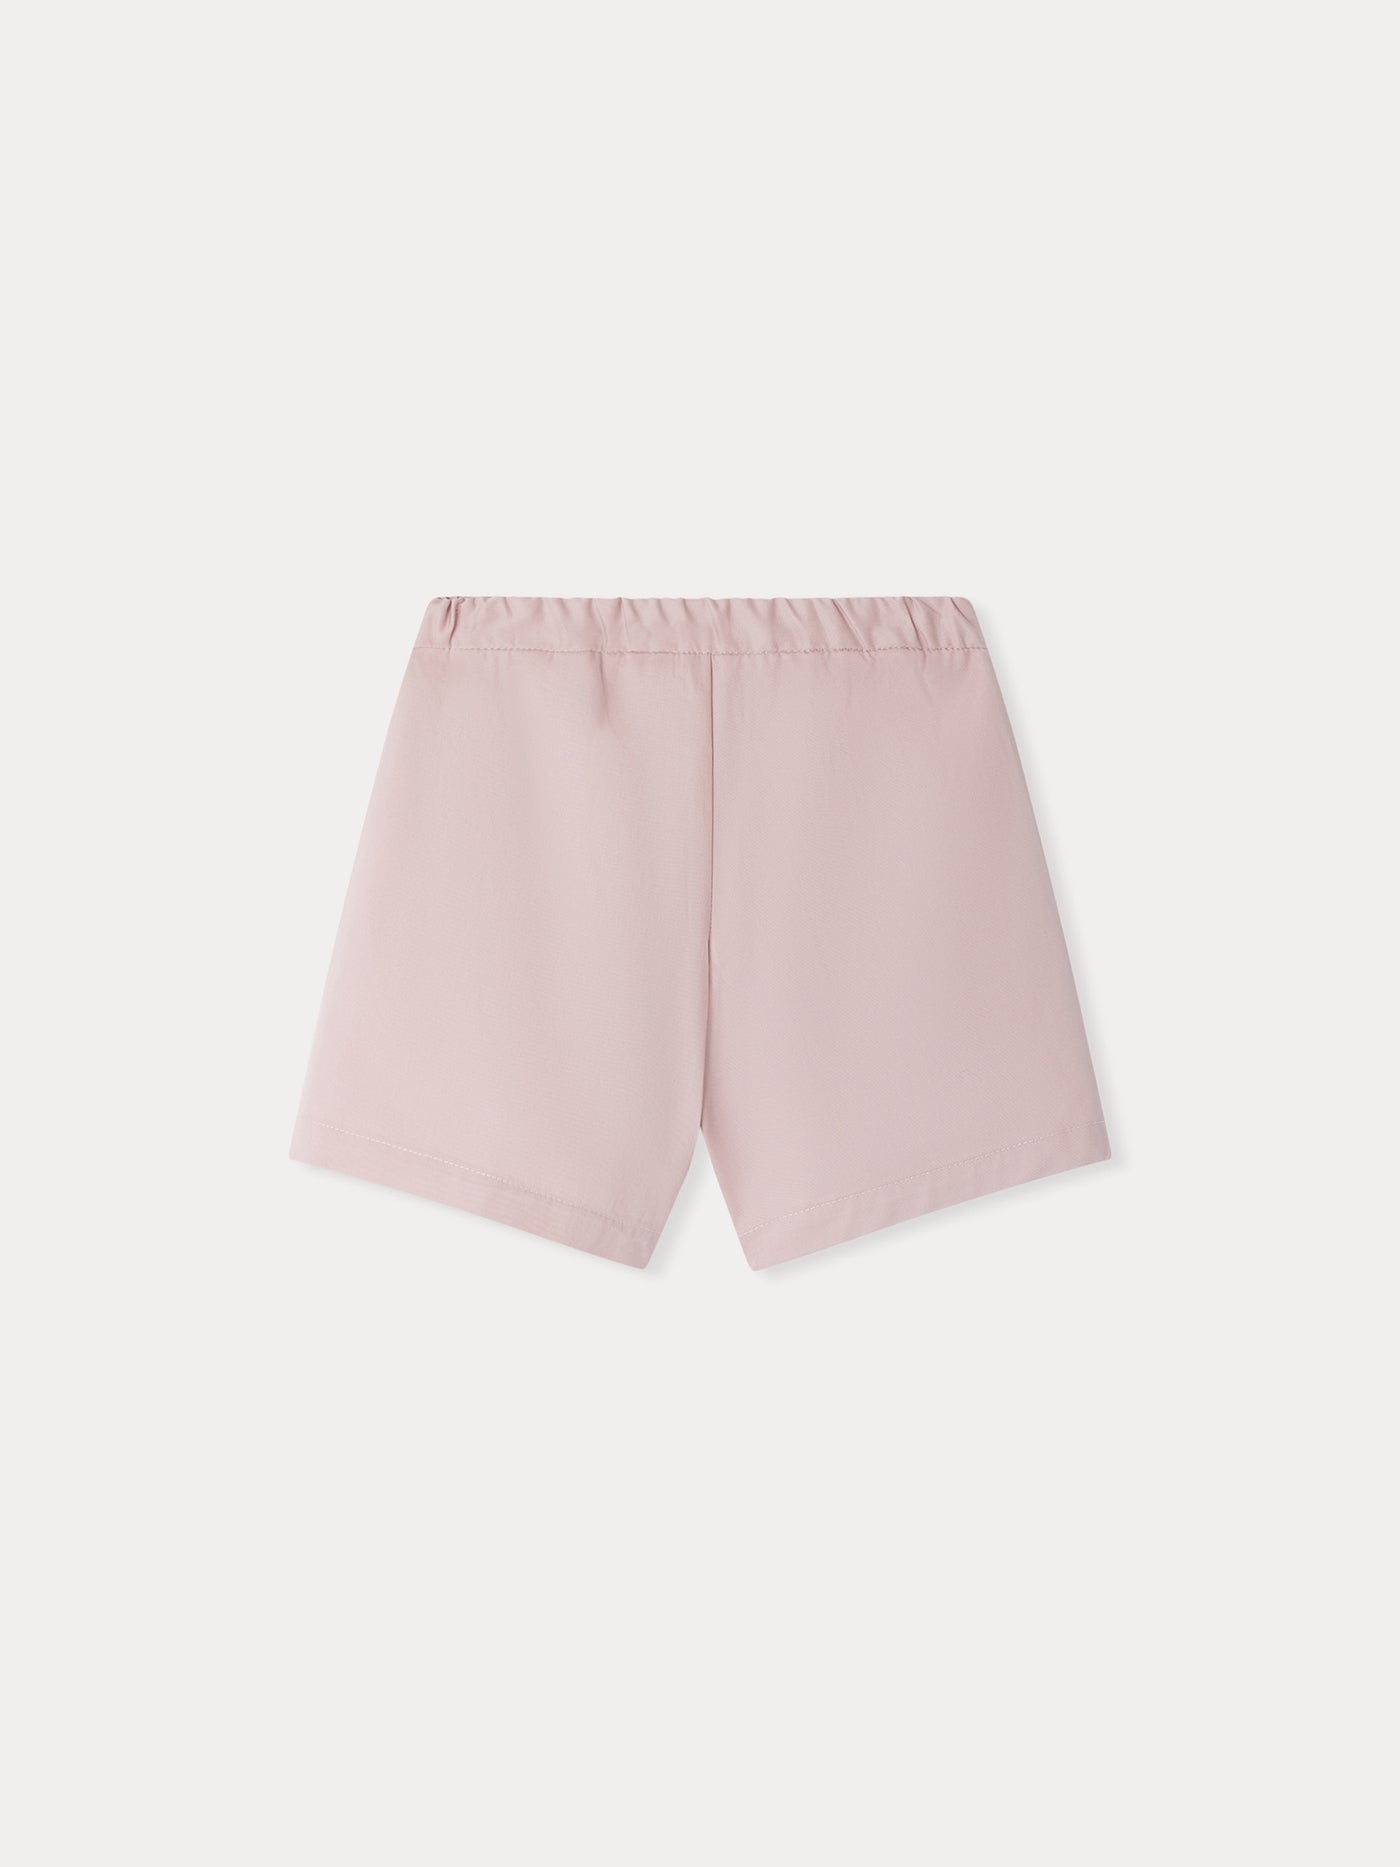 Courtney Shorts faded pink